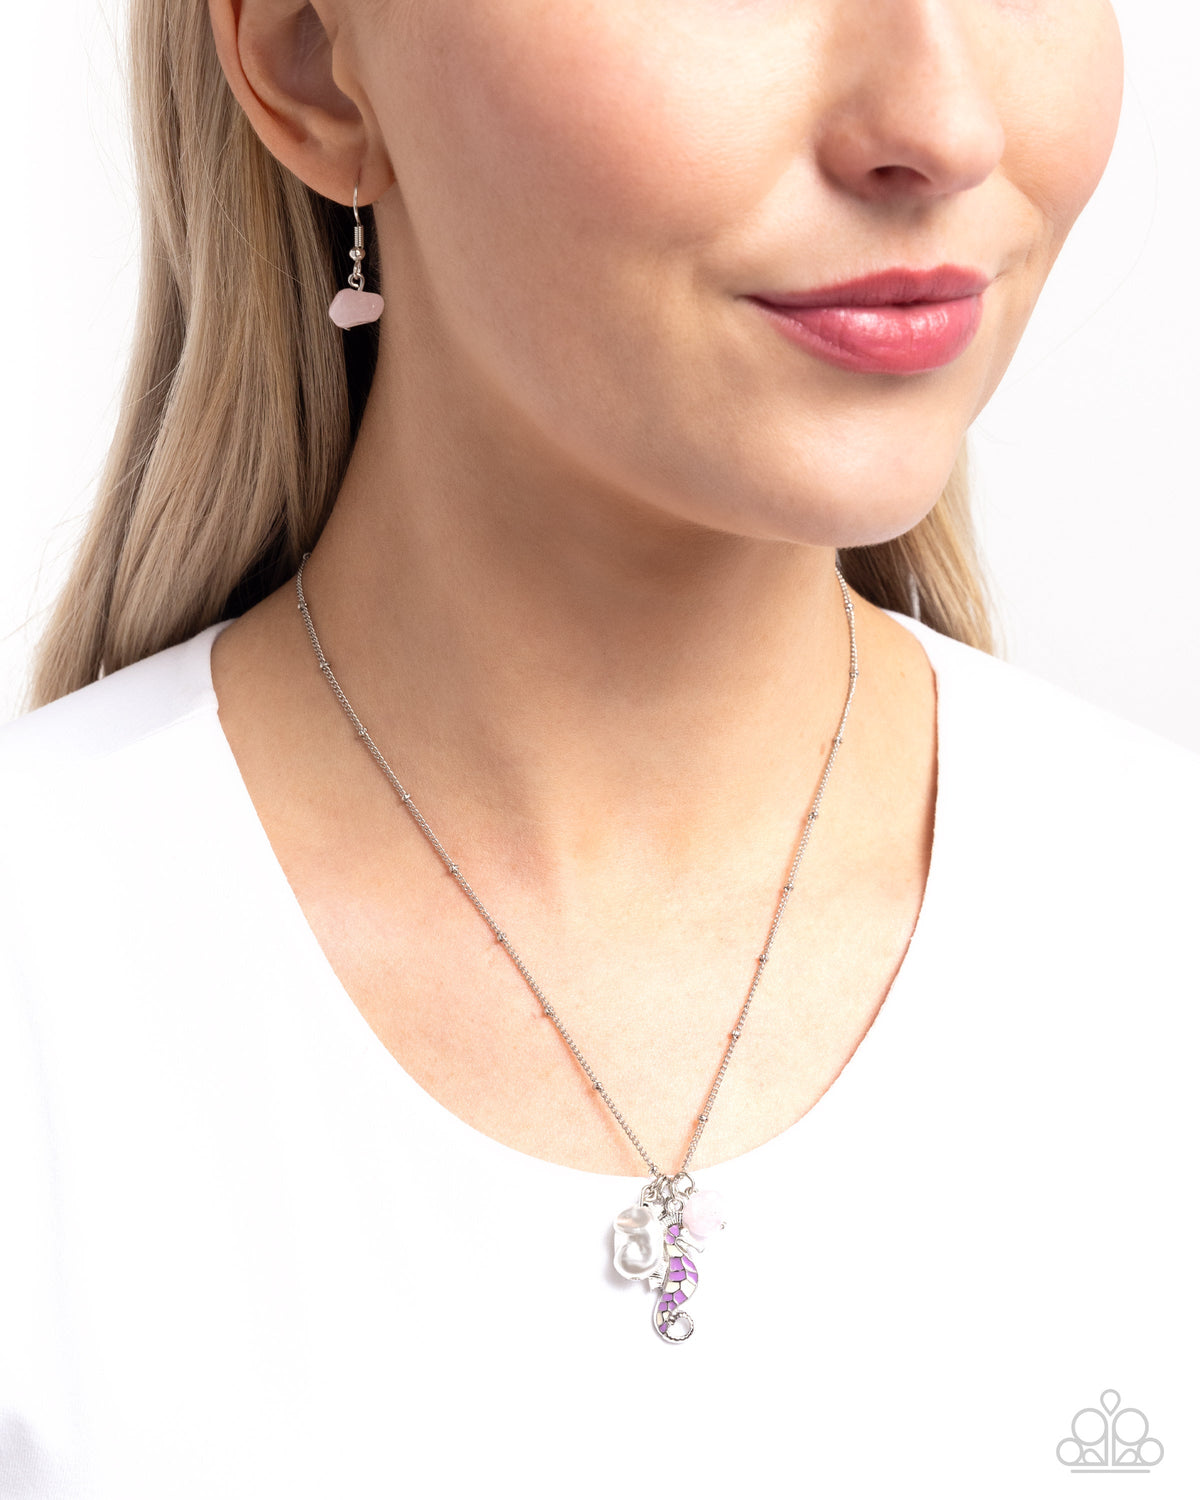 Seahorse Shimmer Purple Necklace - Paparazzi Accessories-on model - CarasShop.com - $5 Jewelry by Cara Jewels